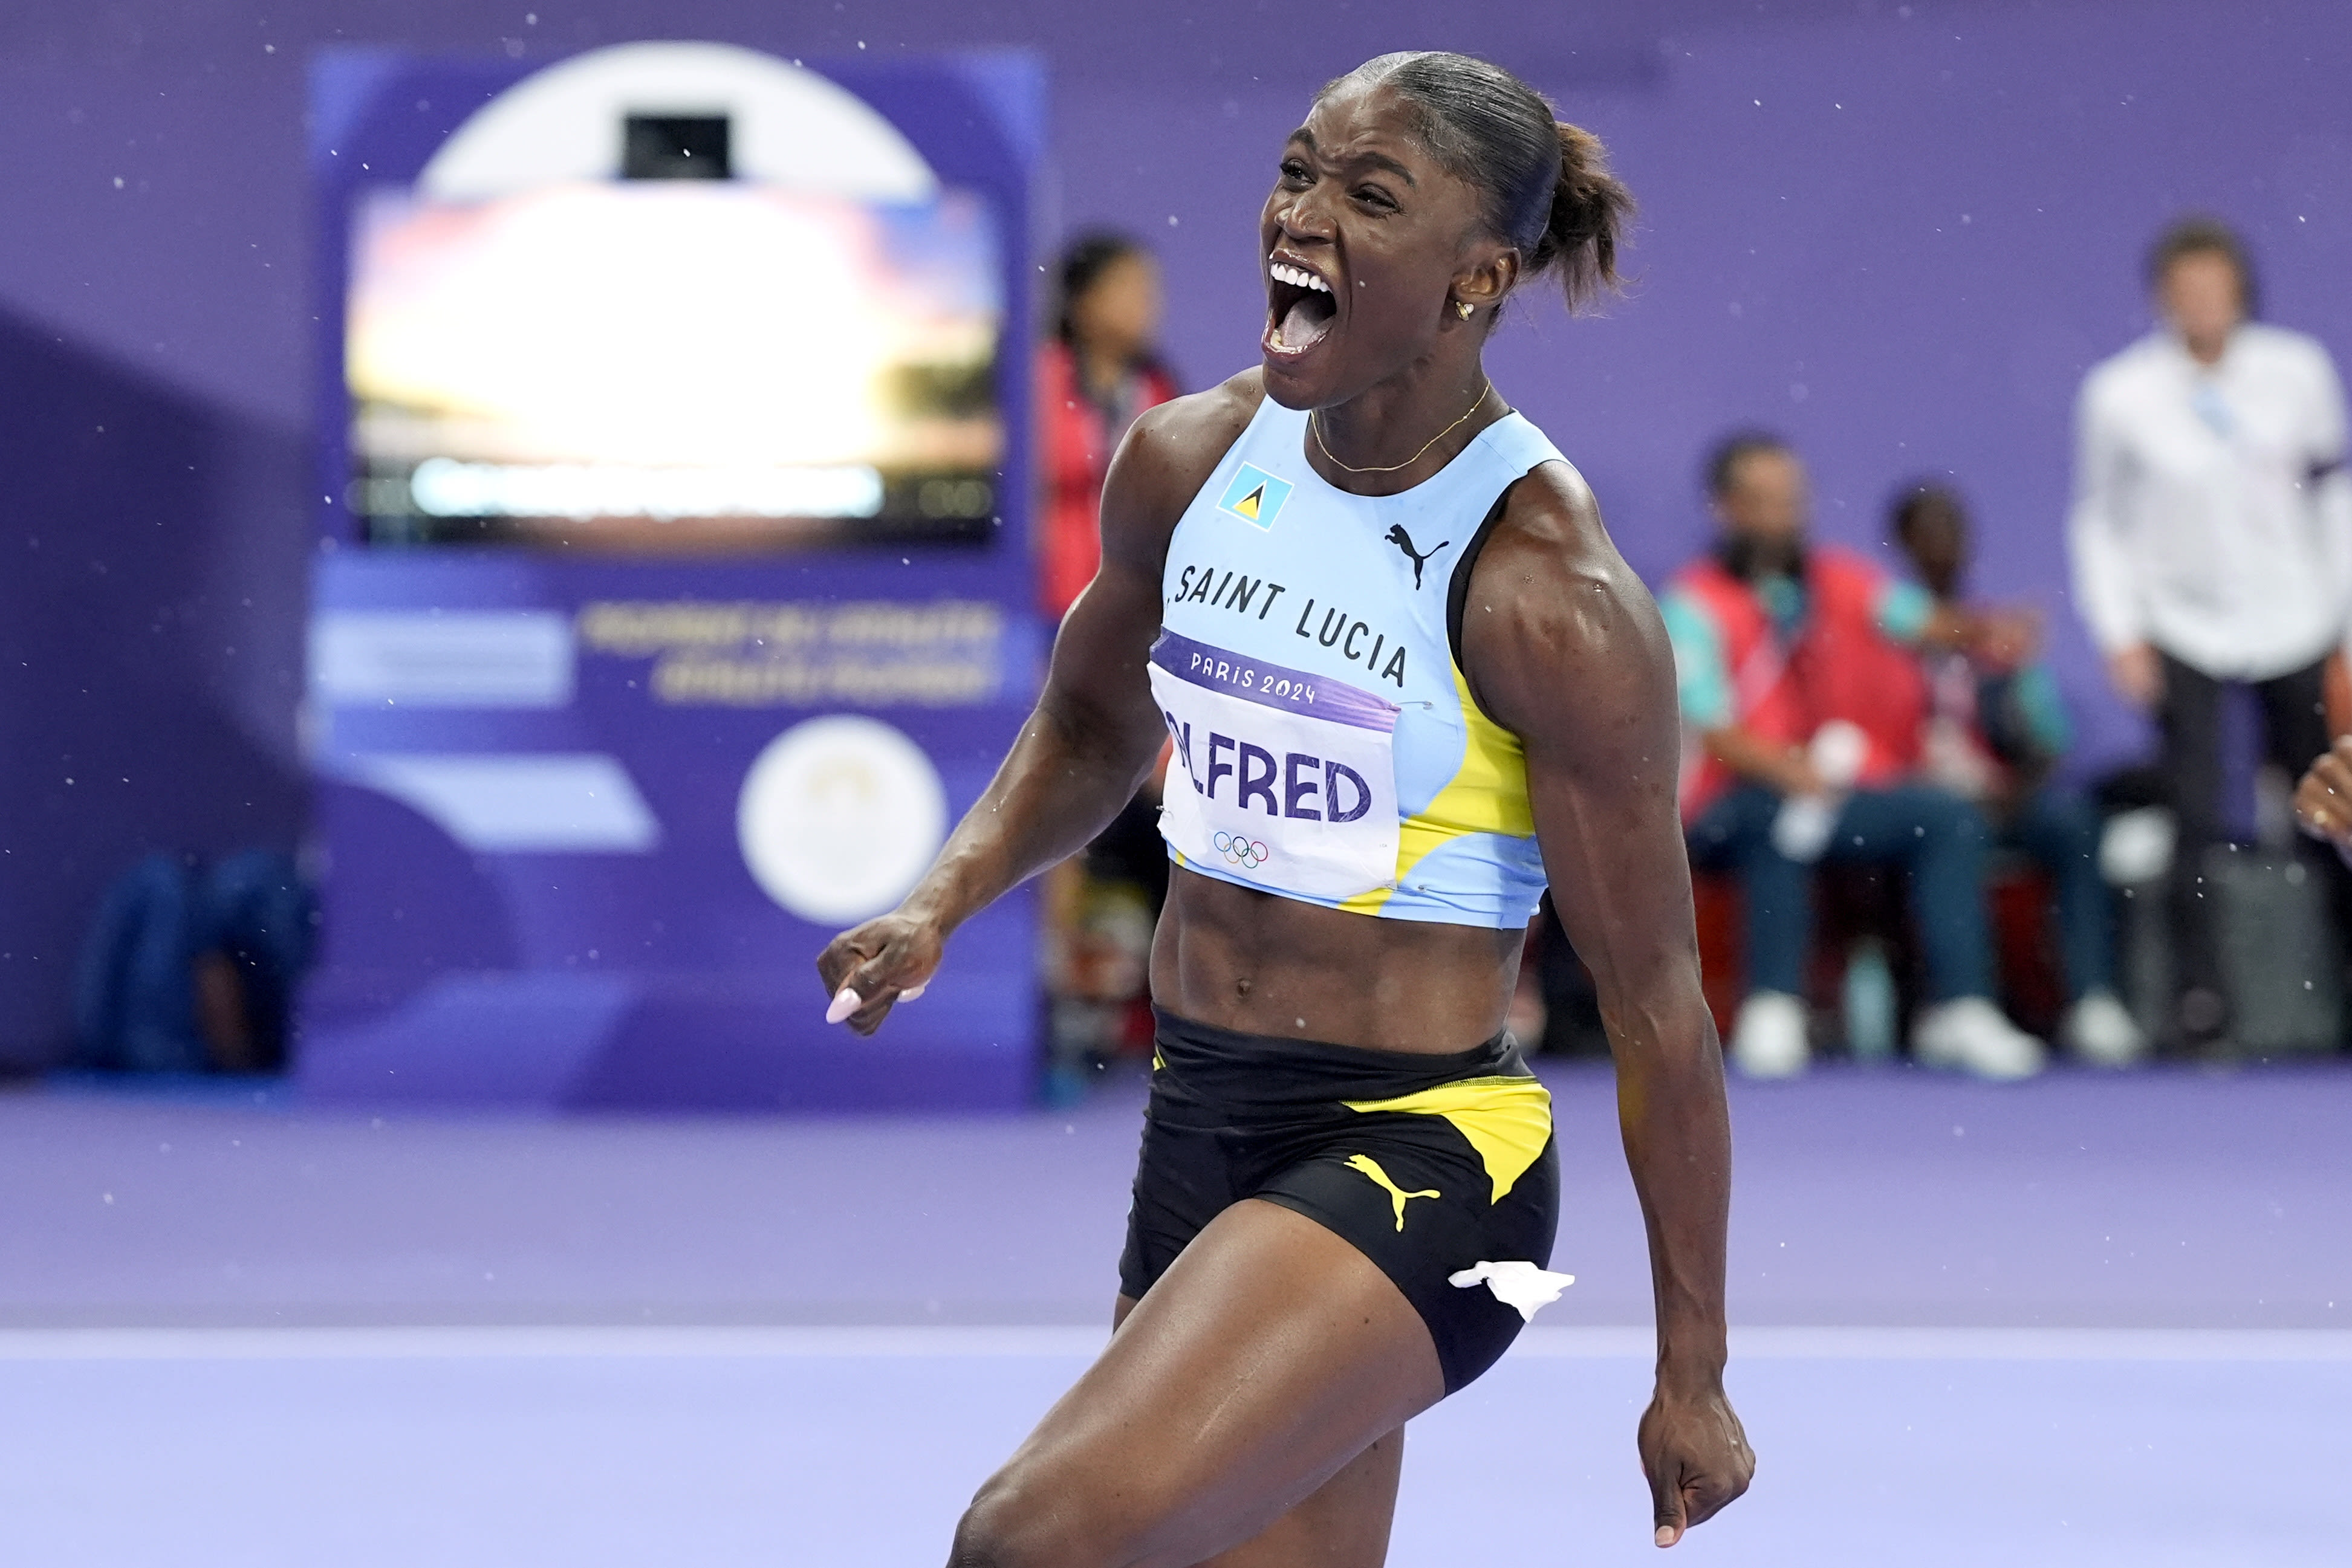 How Julien Alfred went from running barefoot in St. Lucia to the fastest woman in the world